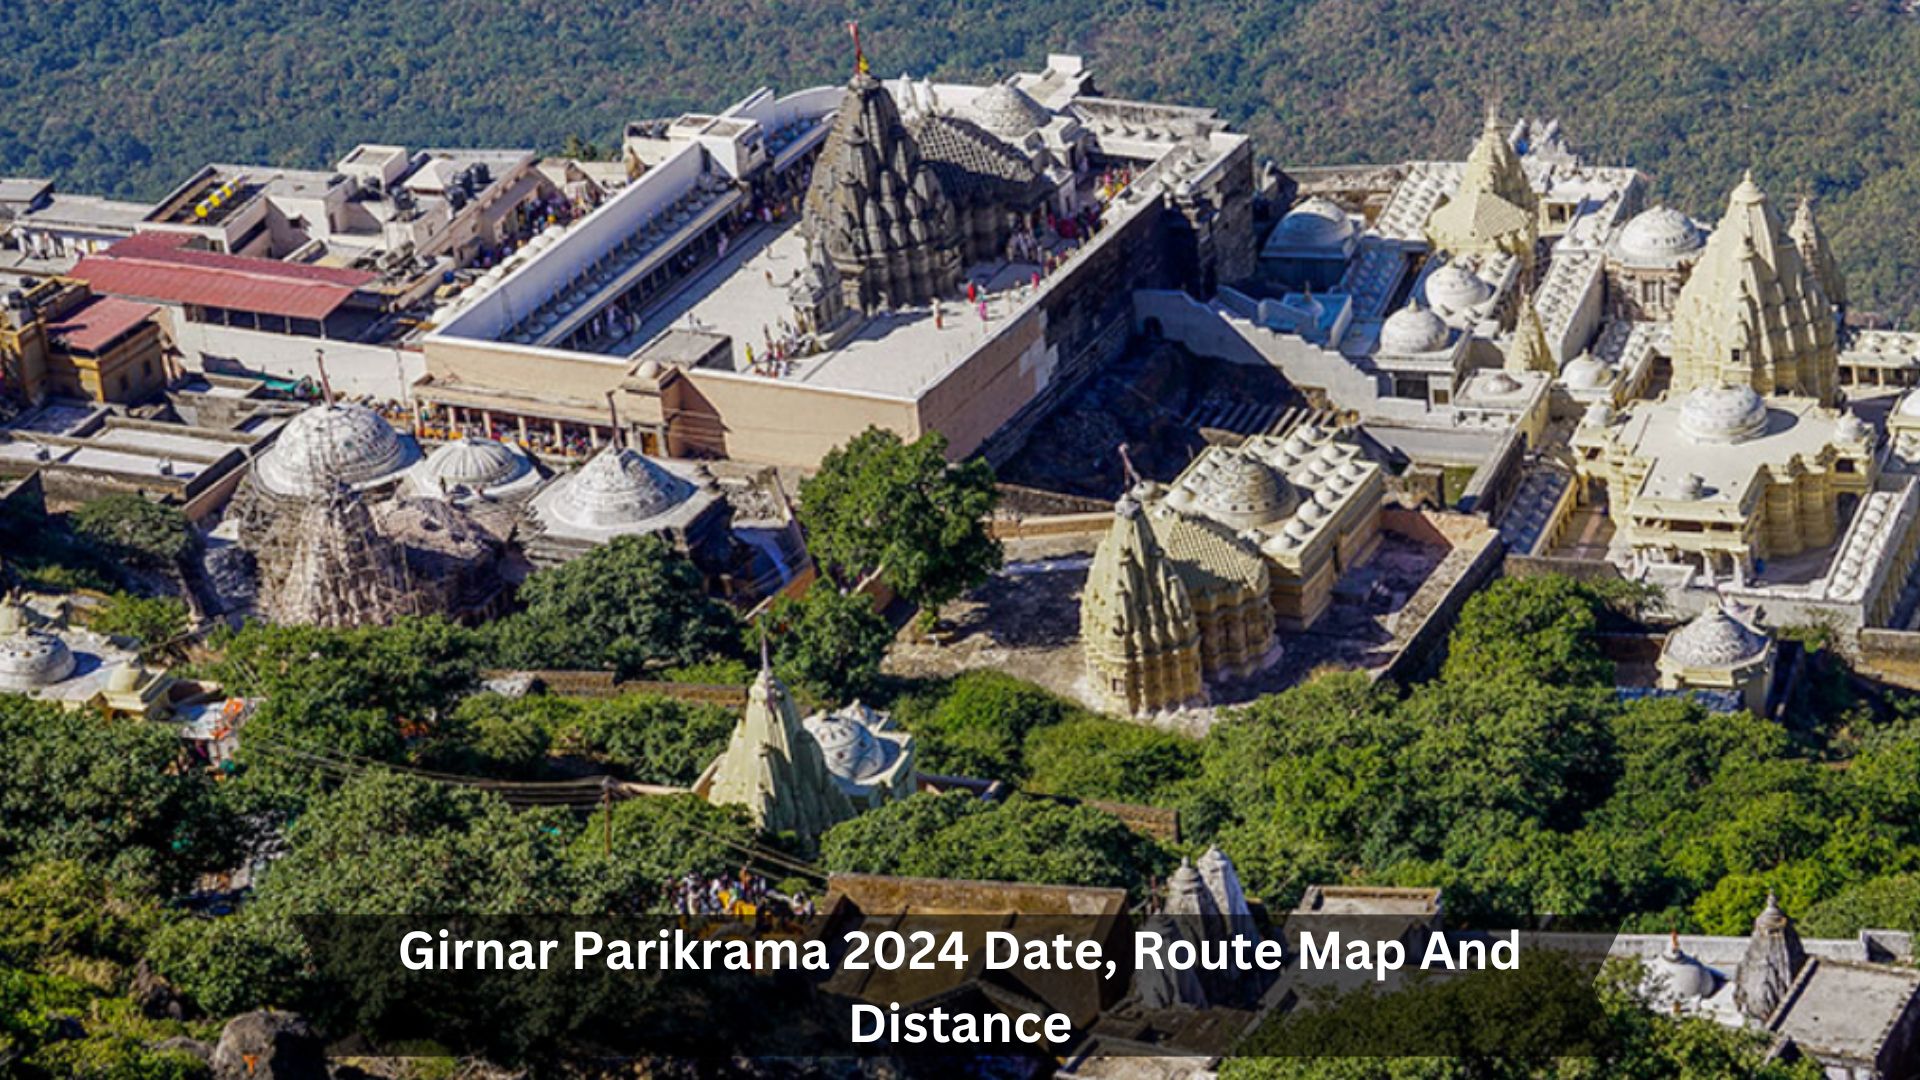 Girnar-Parikrama-2024-Date-Route-Map-And-Distance